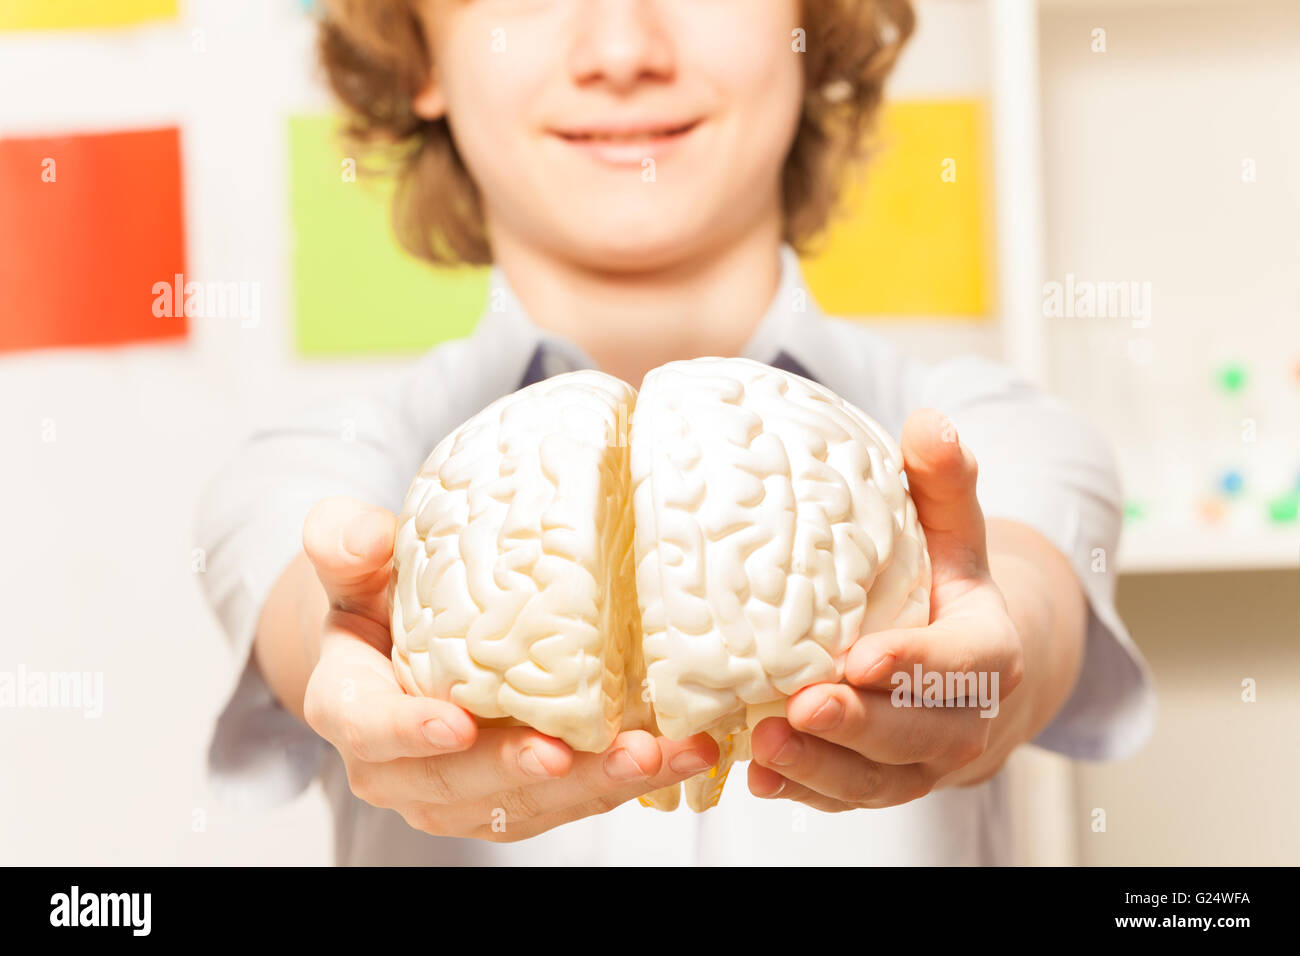 Smiling boy holding cerebrum model at his hands Stock Photo